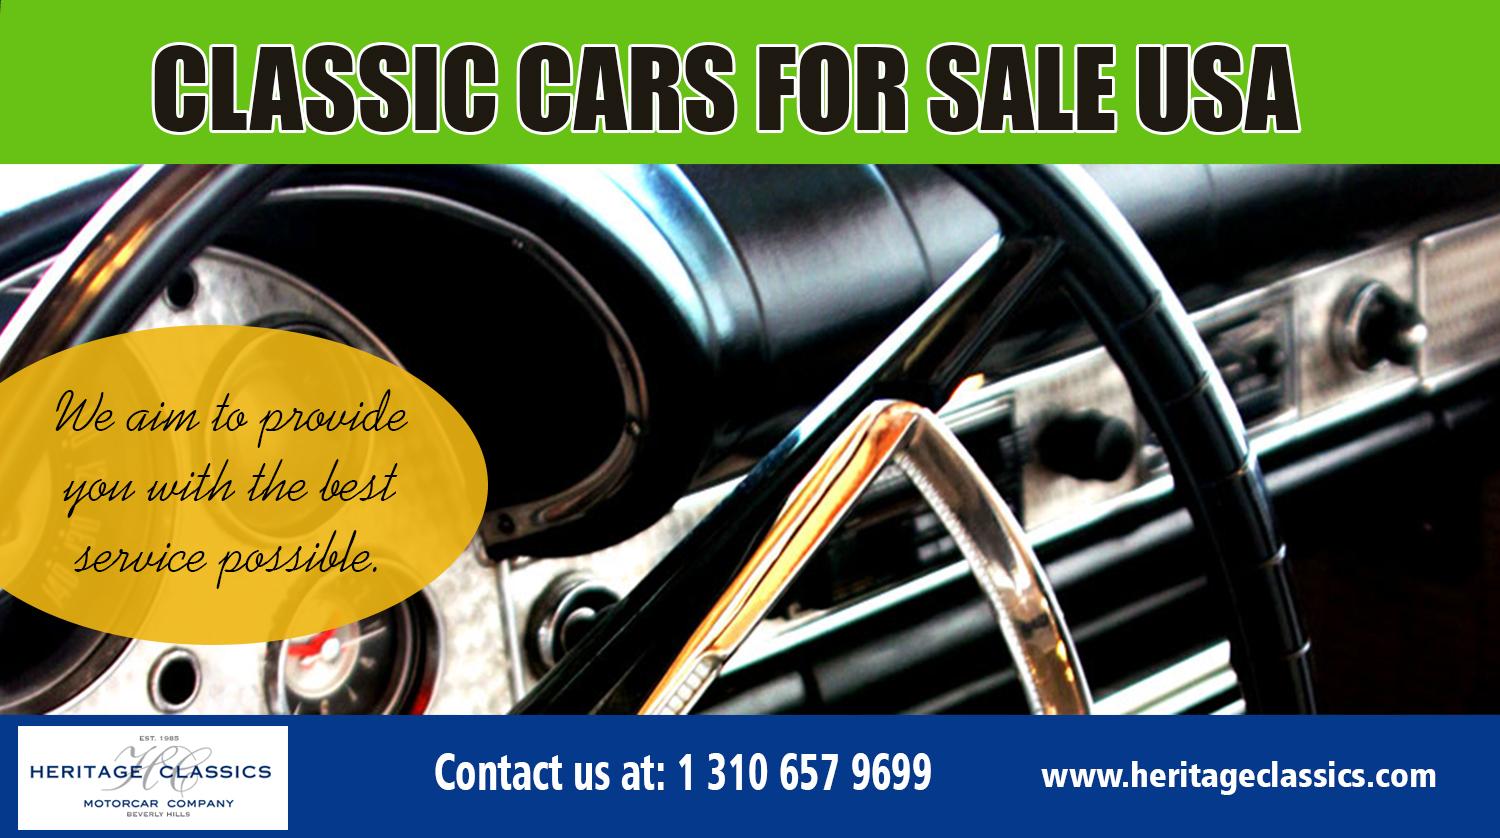 Classic cars for sale USA